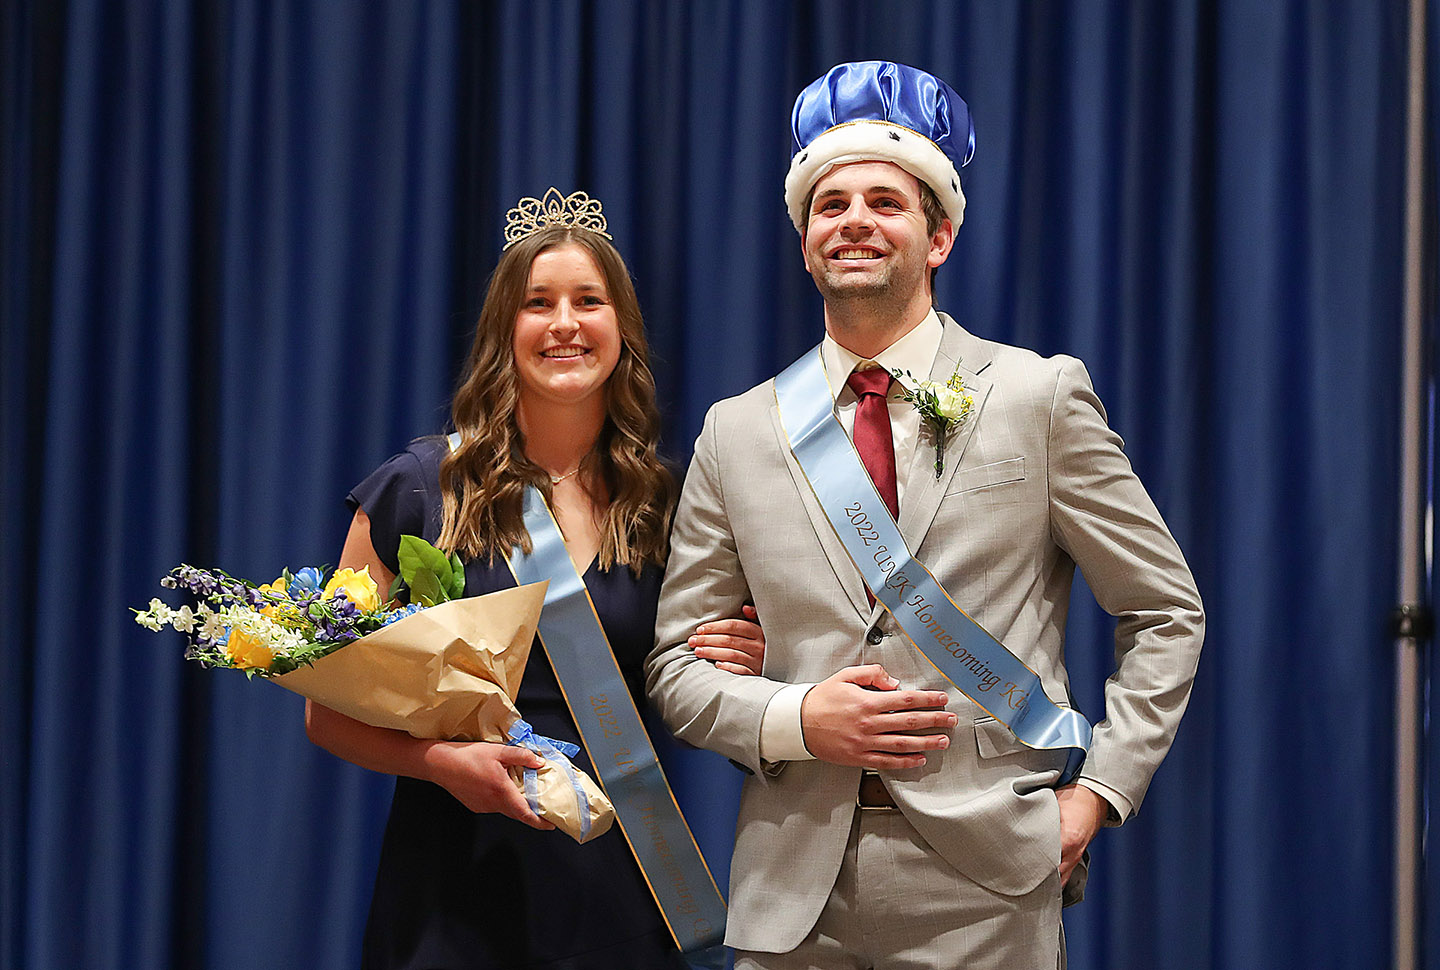 Aidan Weidner and Aspen Luebbe were crowned UNK homecoming king and queen in October. (Photo by Erika Pritchard, UNK Communications)